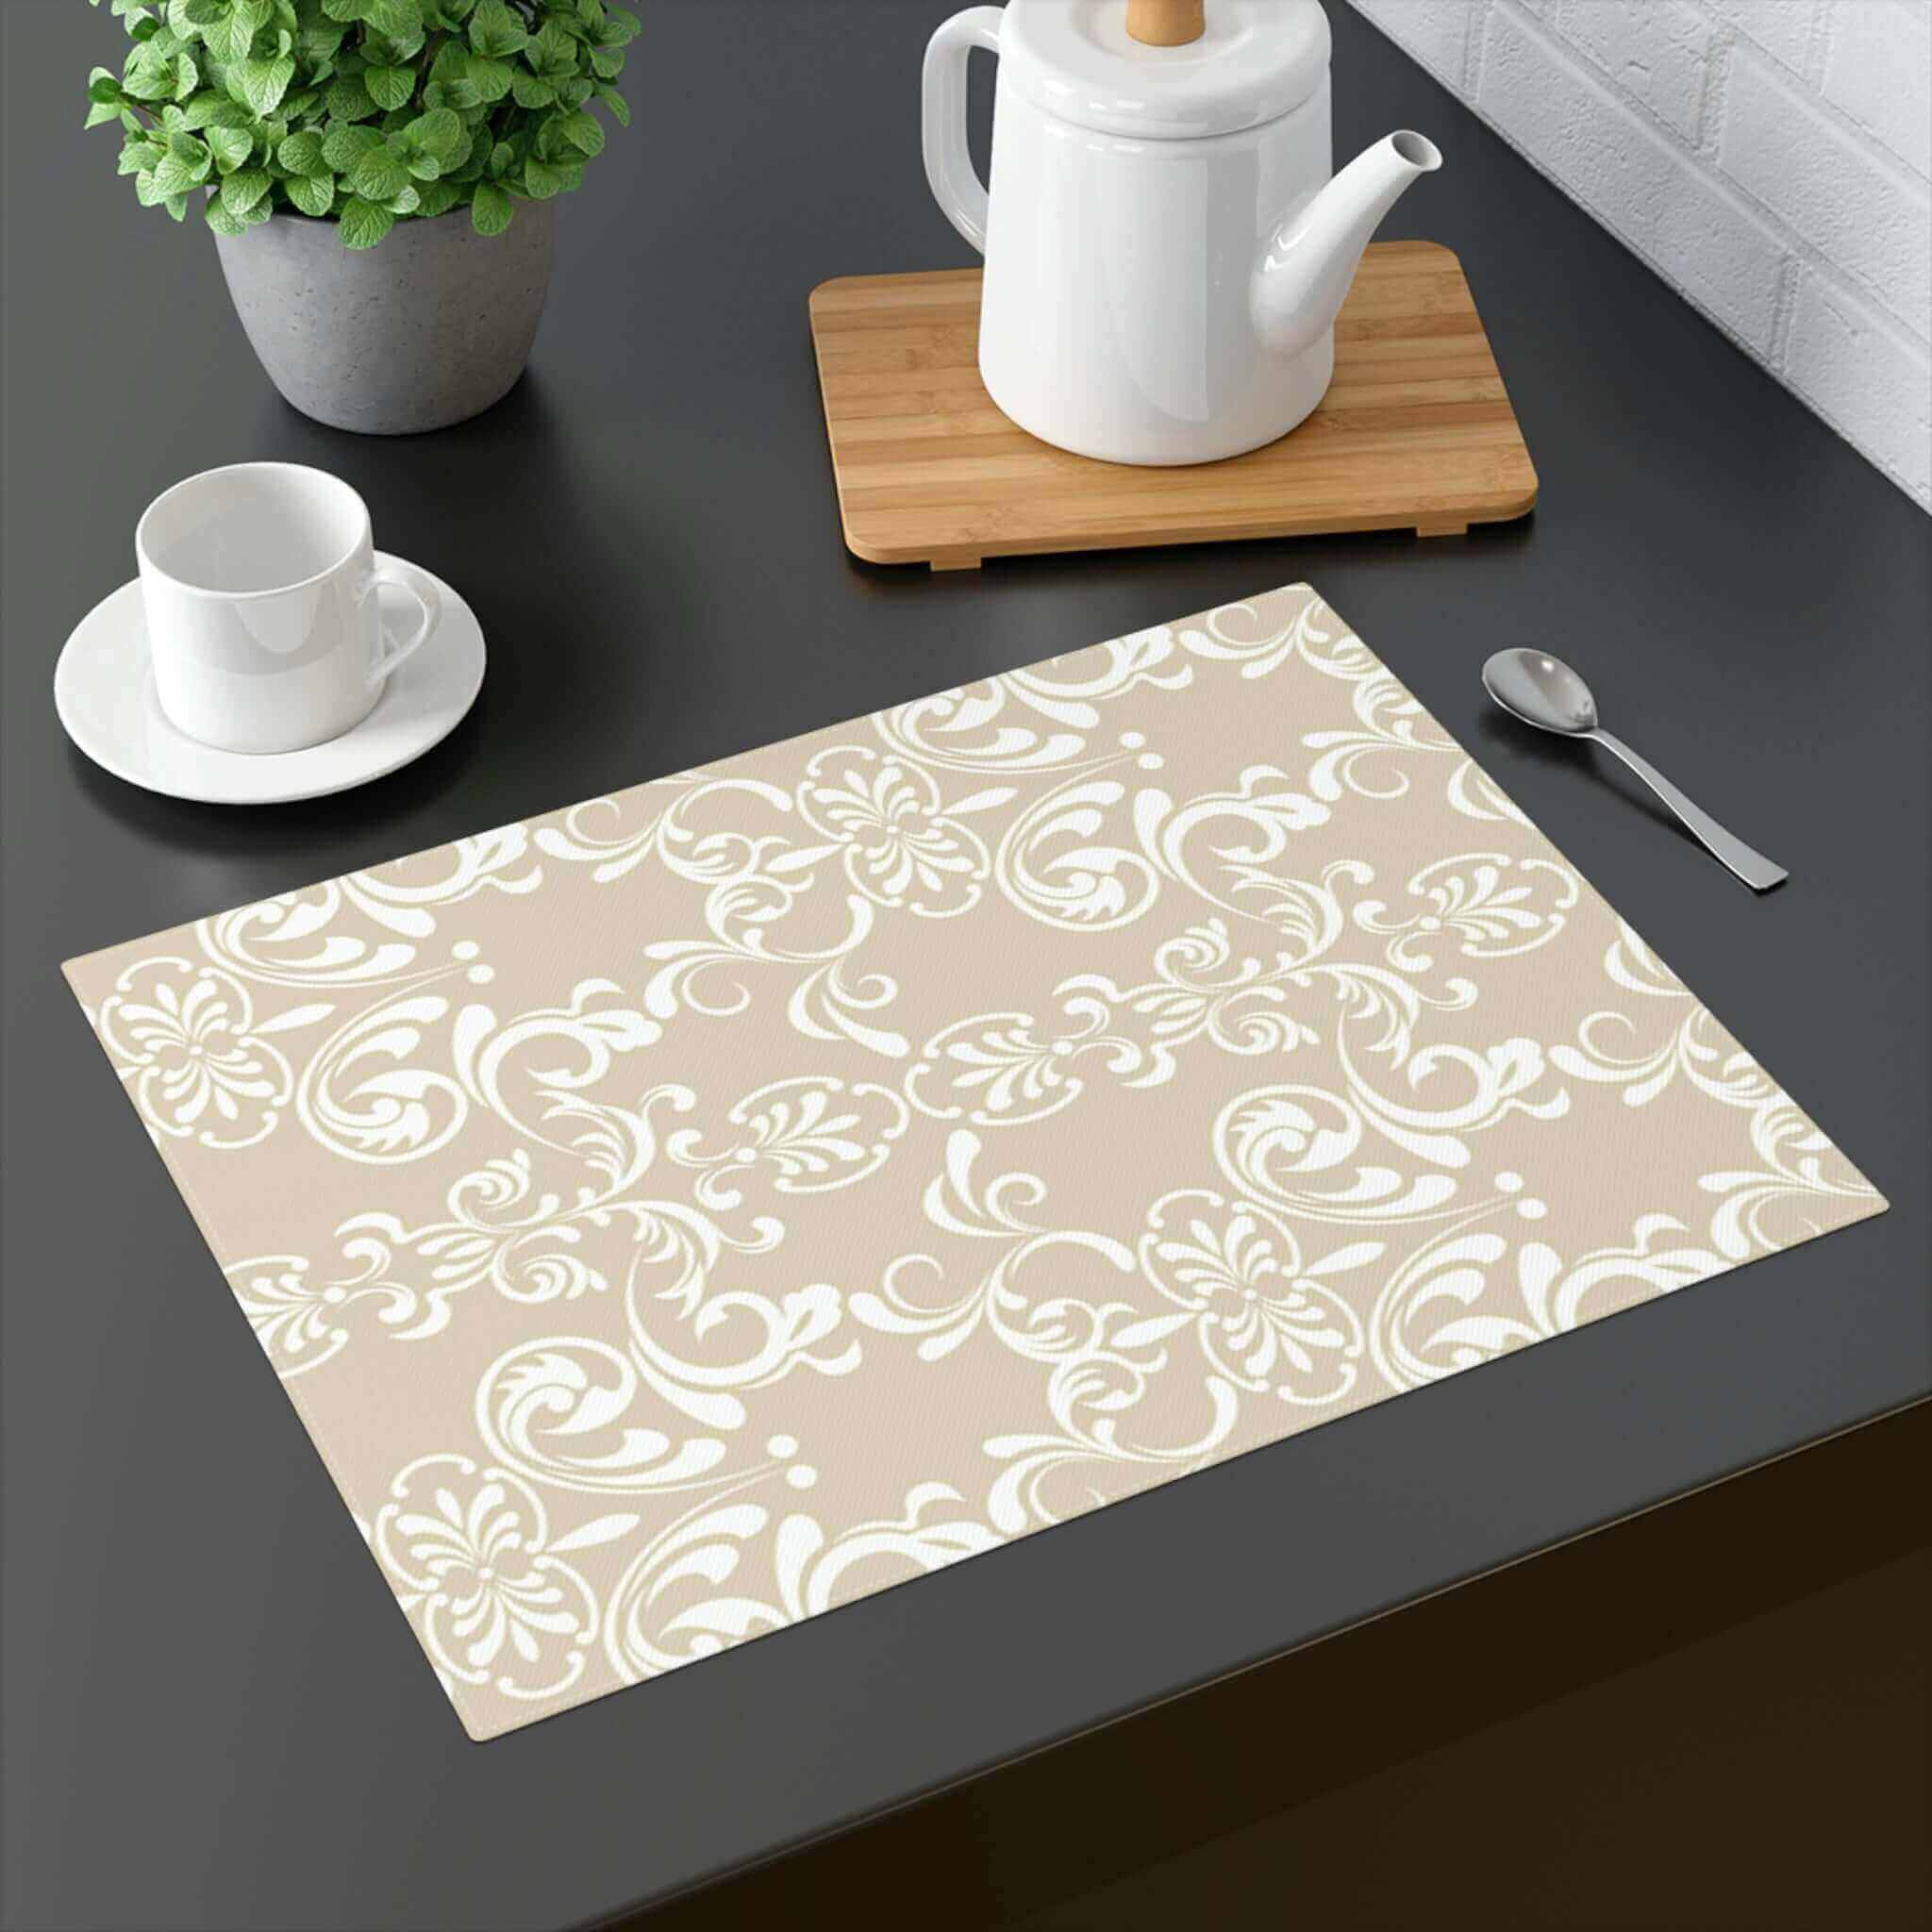 Floral Patterned Placemat, 1pc - Hearth Home & Living